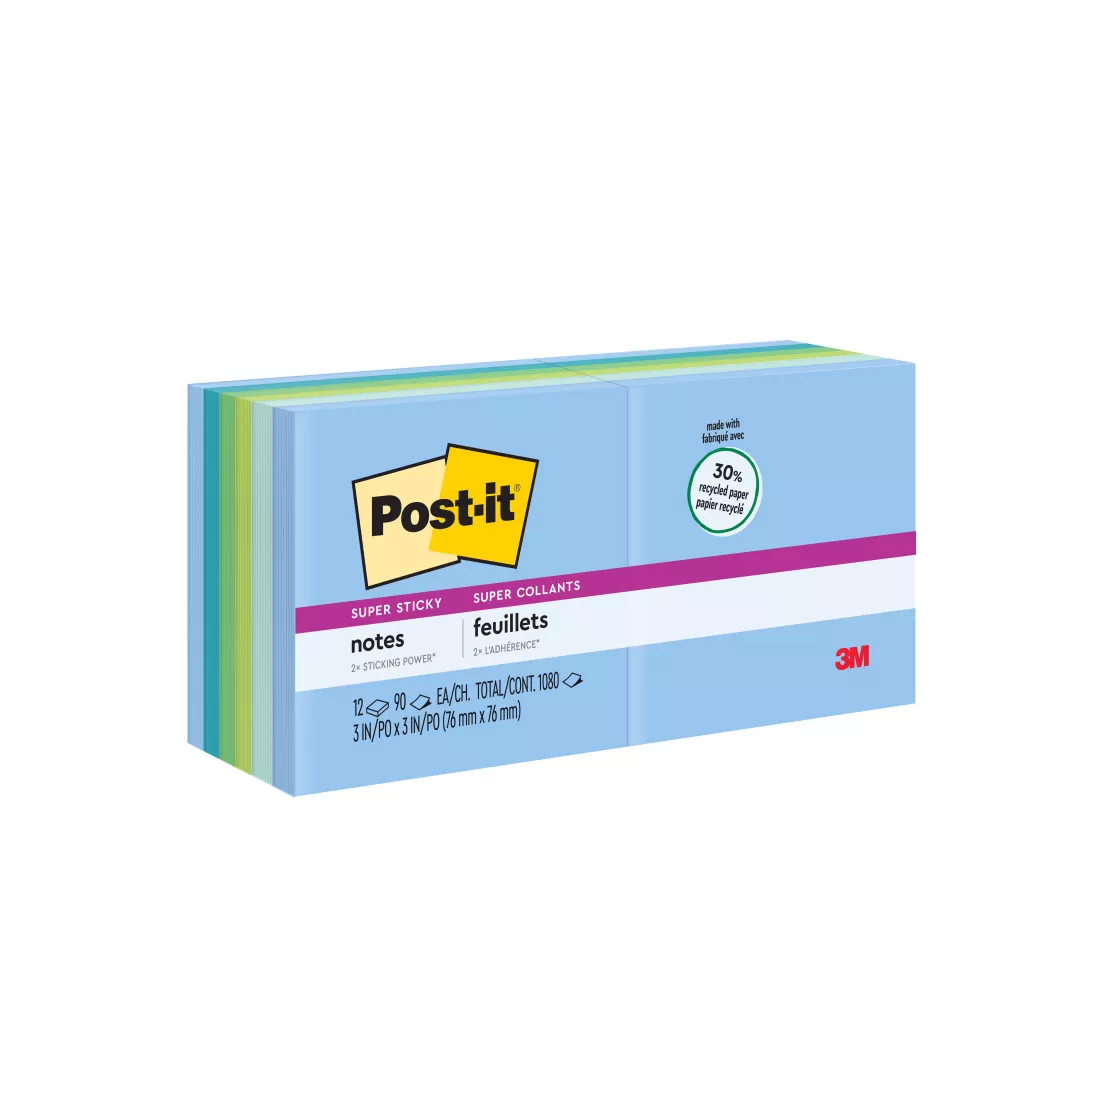 Post-it® Super Sticky Recycled Notes 654-12SST, 3 in x 3 in (76 mm x 76
mm) Bora Bora Collection